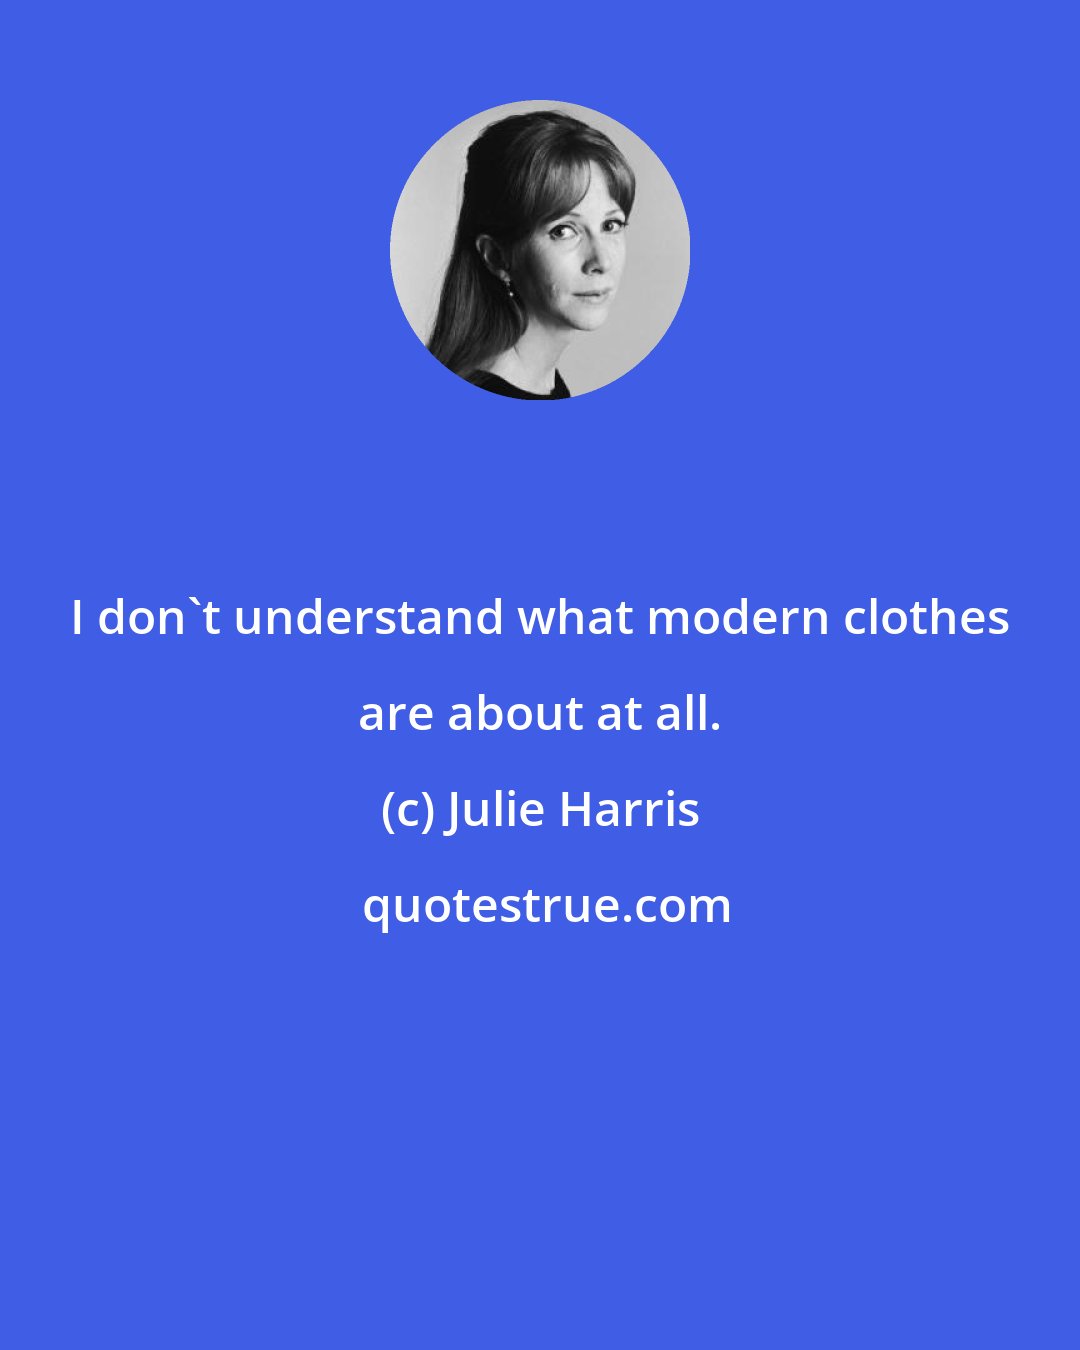 Julie Harris: I don't understand what modern clothes are about at all.